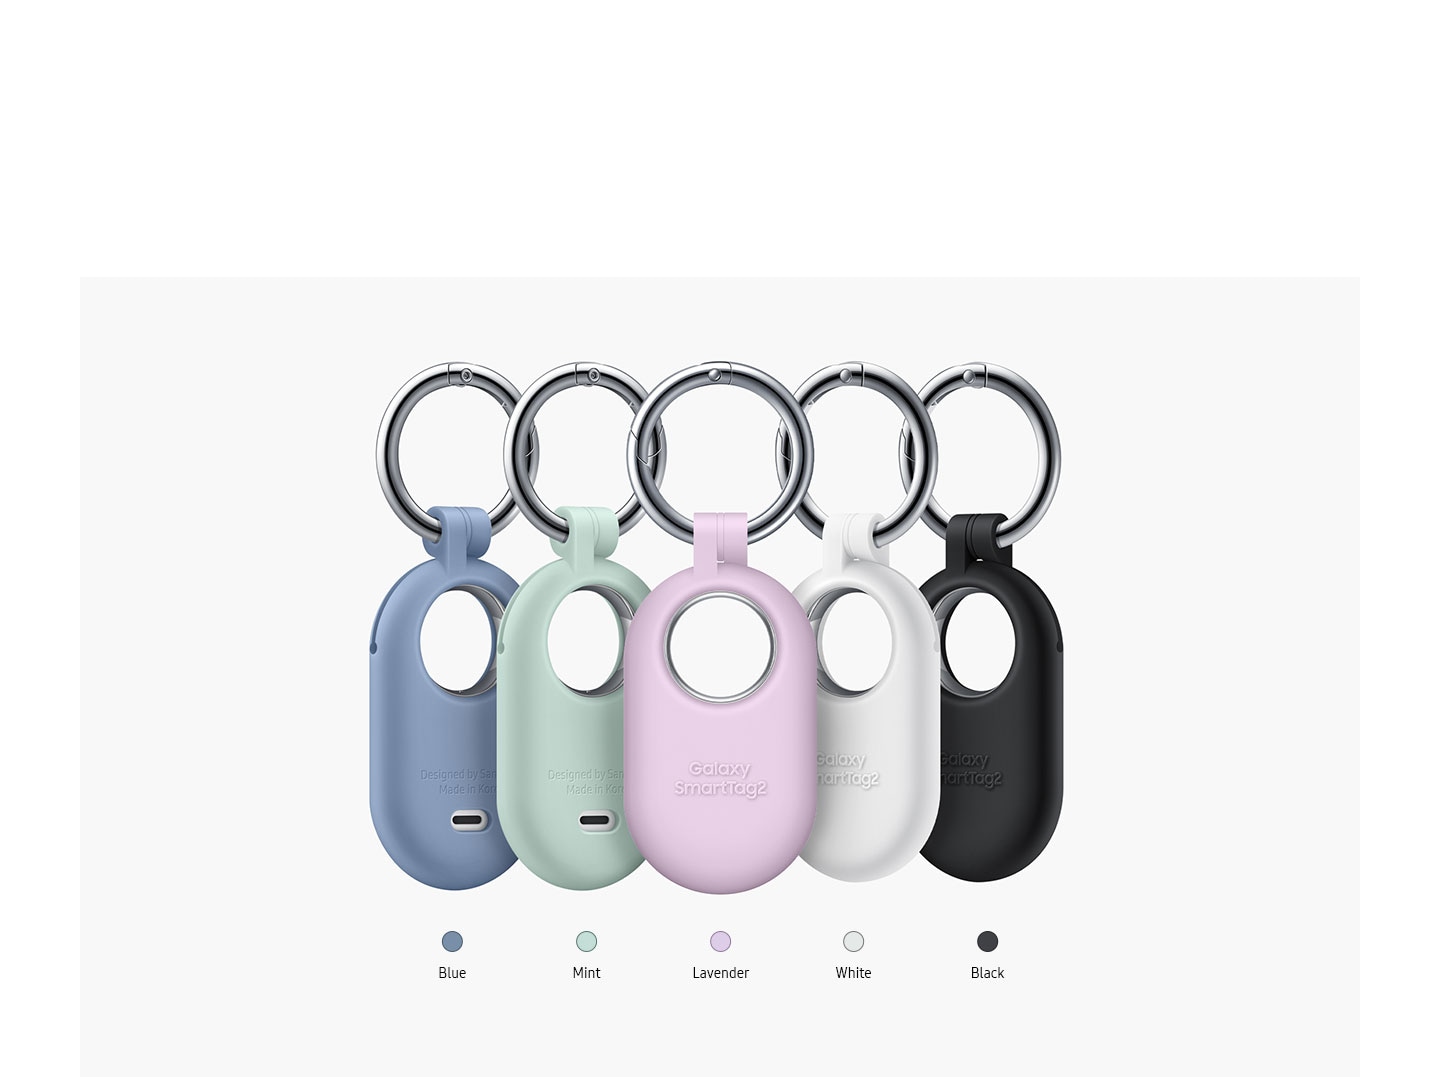 Five Galaxy SmartTag2 are in different Silicone Cases. Below each are the color chip and color name Blue, Mint, Lavender, White and Black.